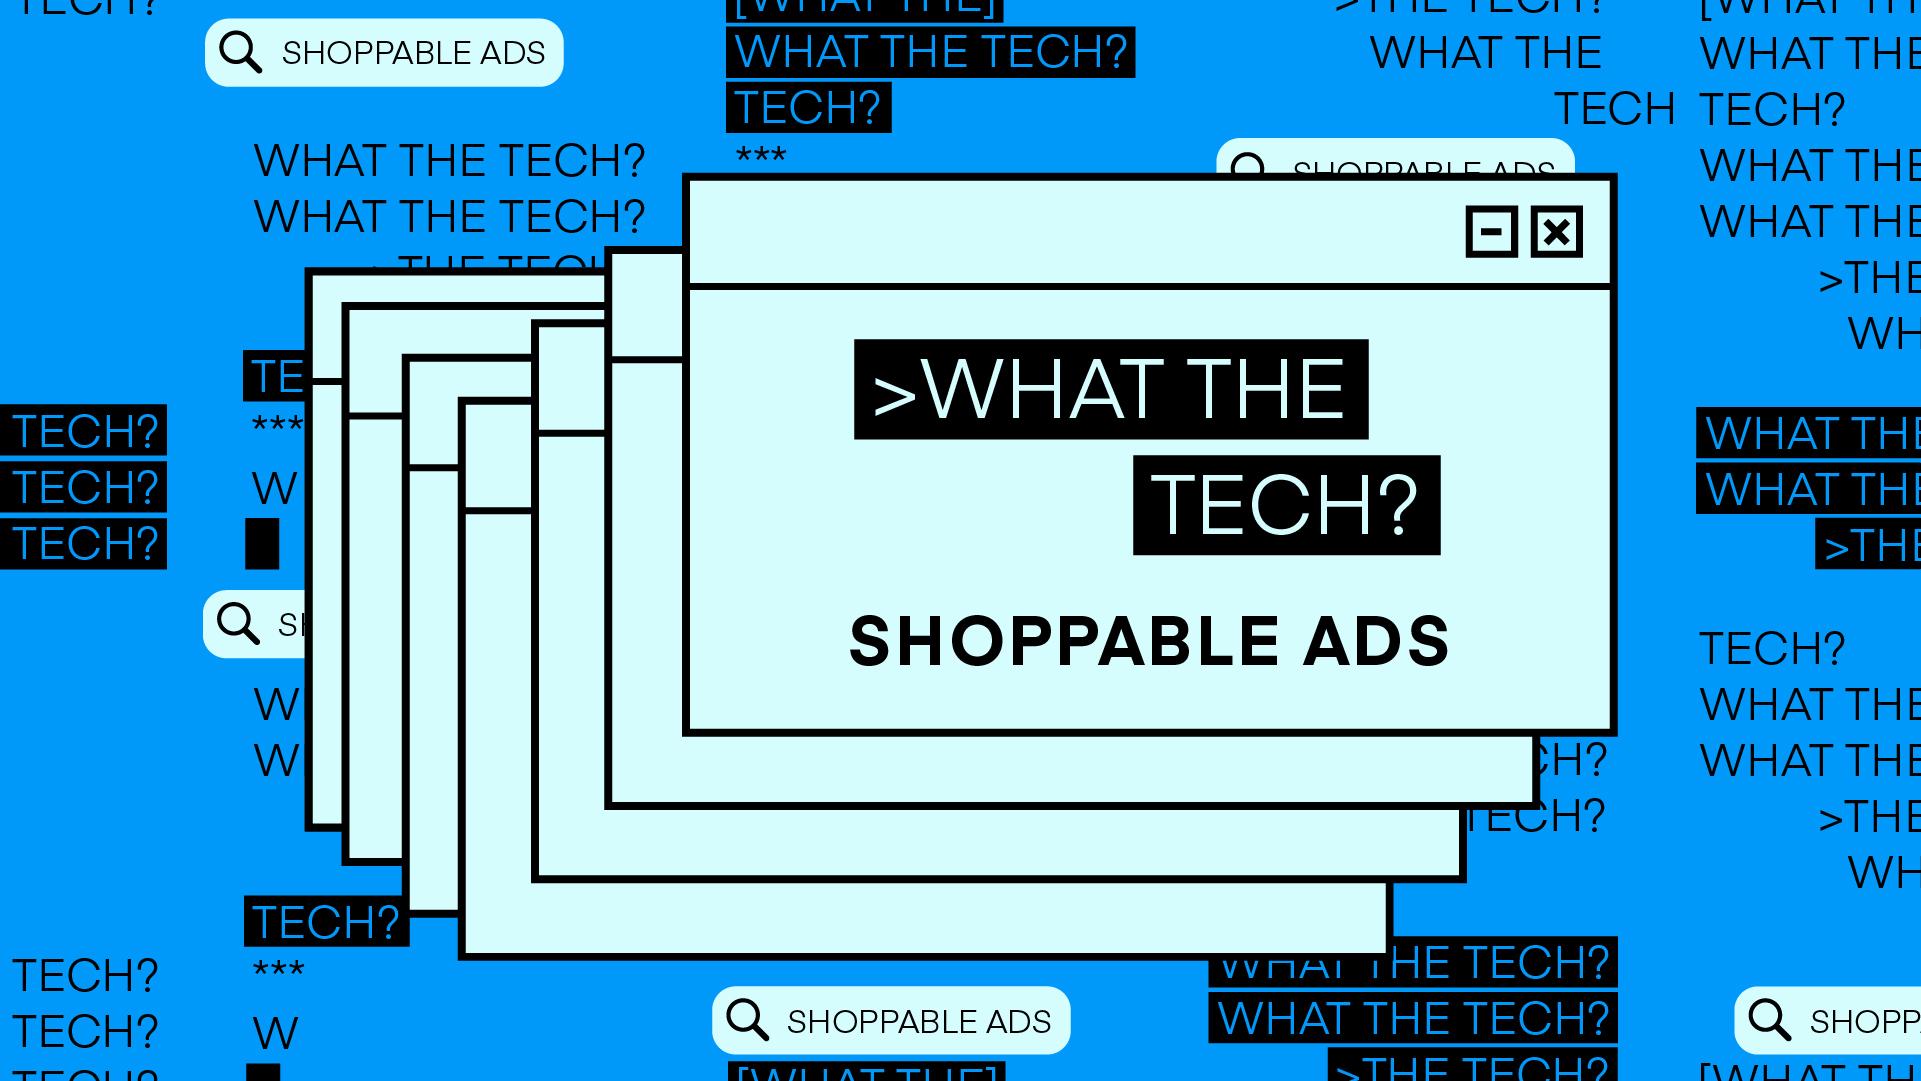 What the Tech are shoppable ads?